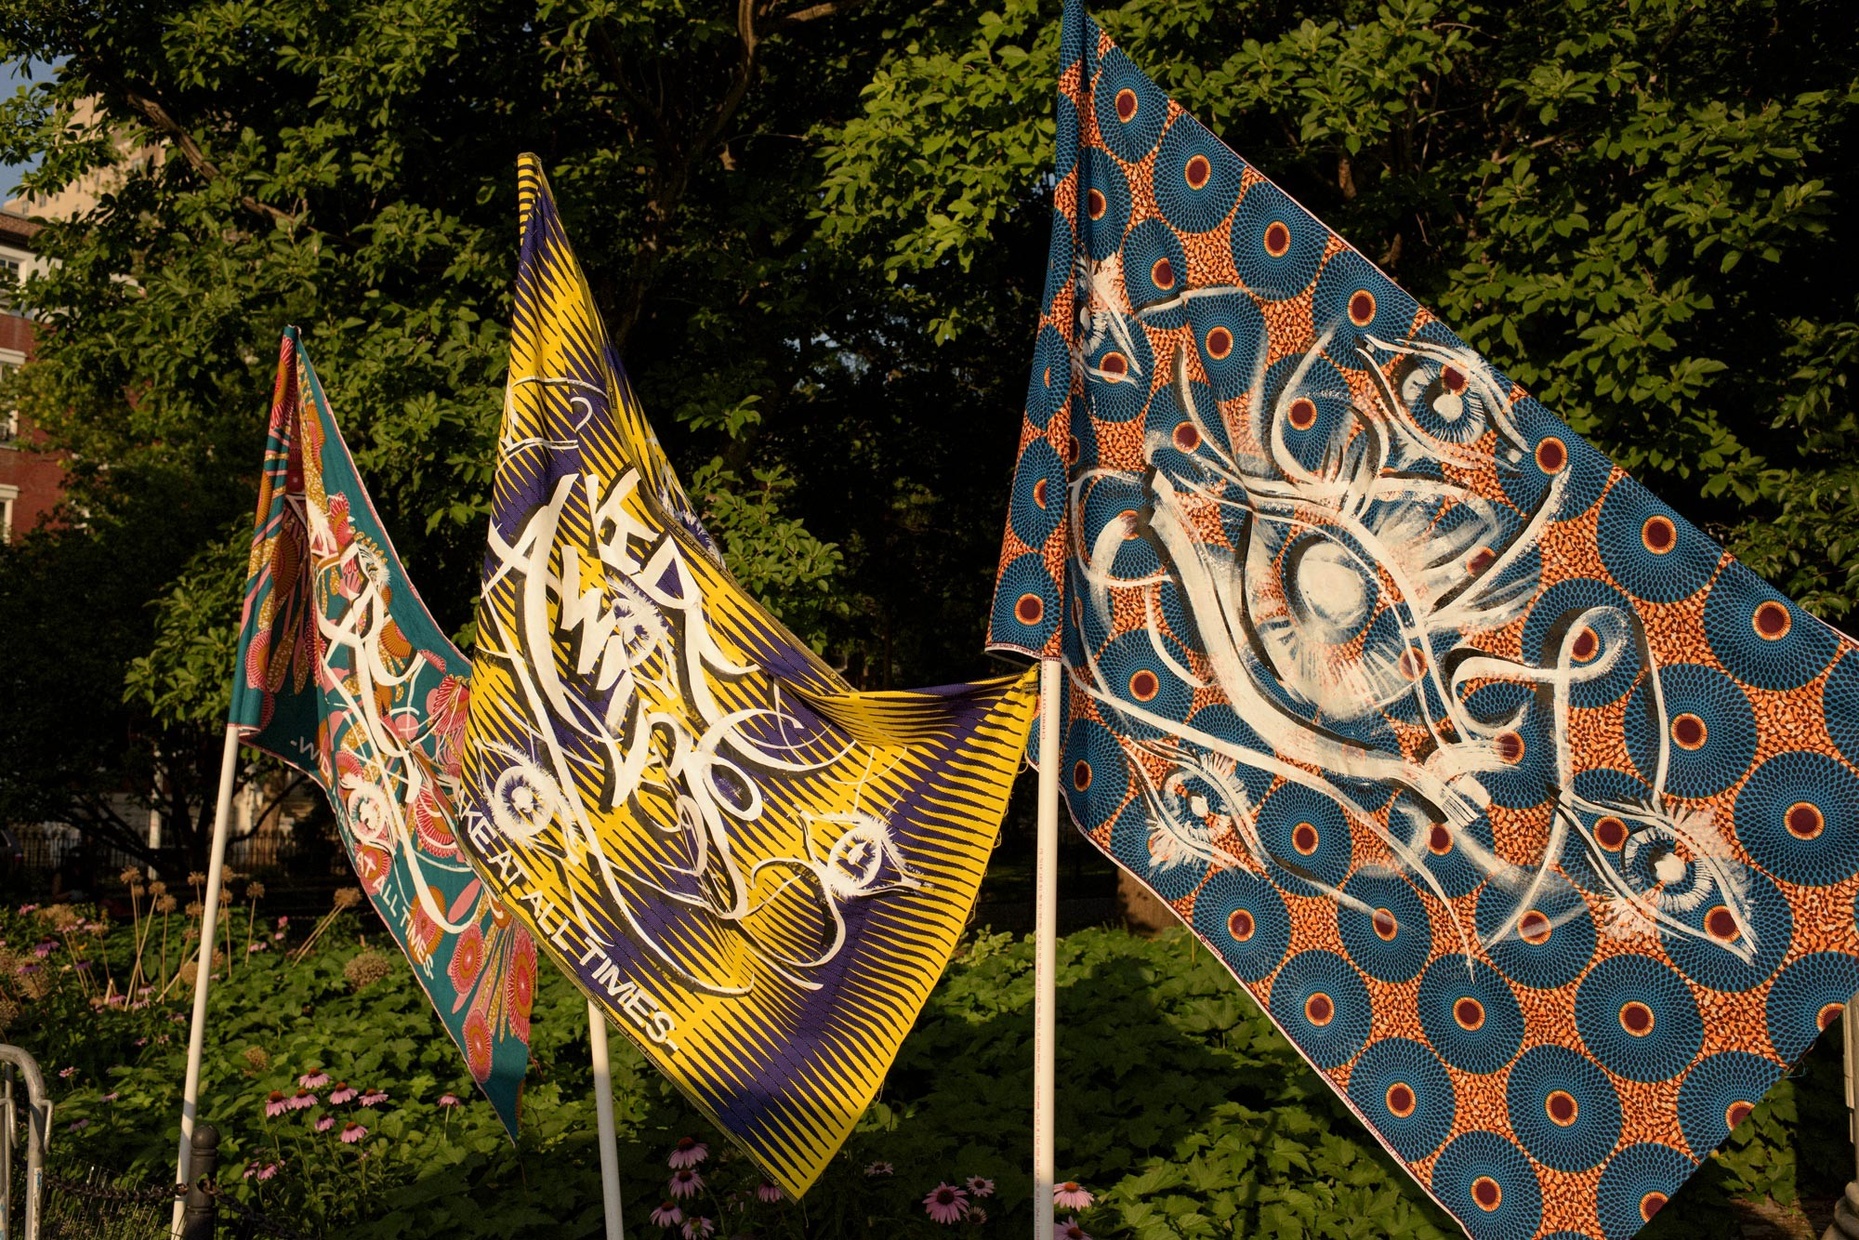 A photograph of three colorful flags blowing in the wind, with green leaves behind them. The flag on the right bears five white eyes atop a blue and orange pattern.